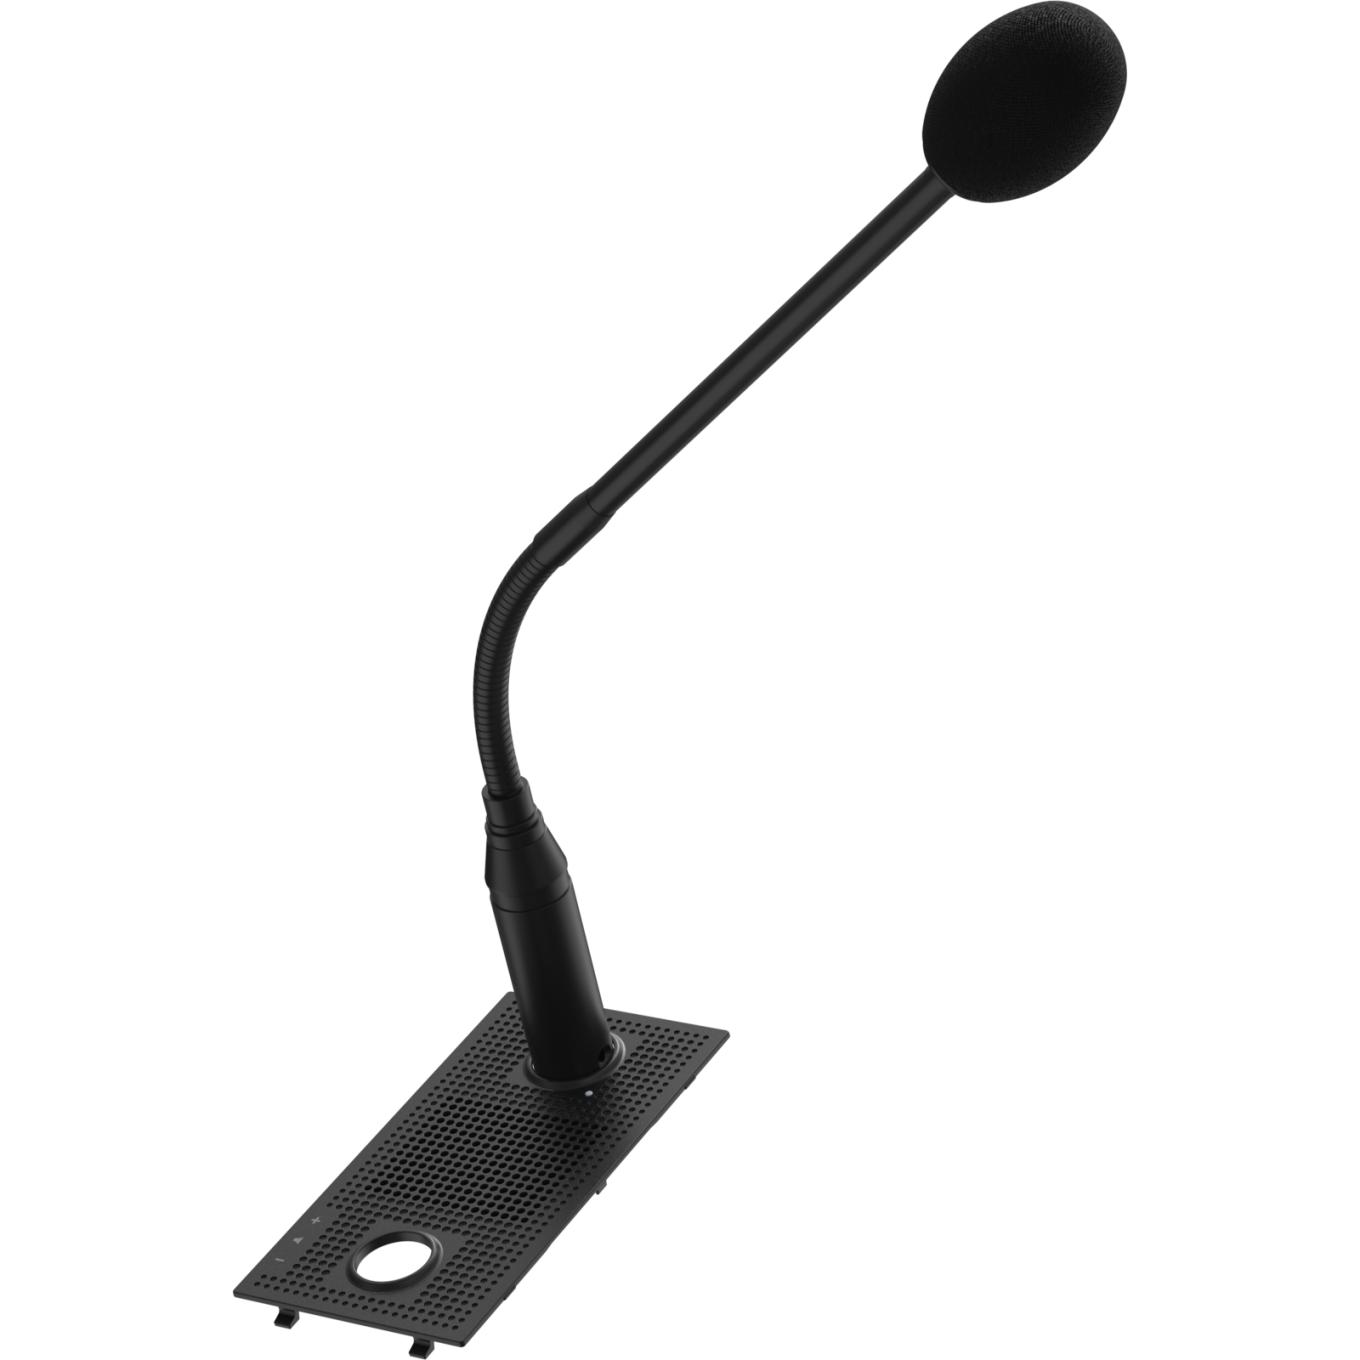 Black AXIS TC6901 Gooseneck Microphone viewed from the left.